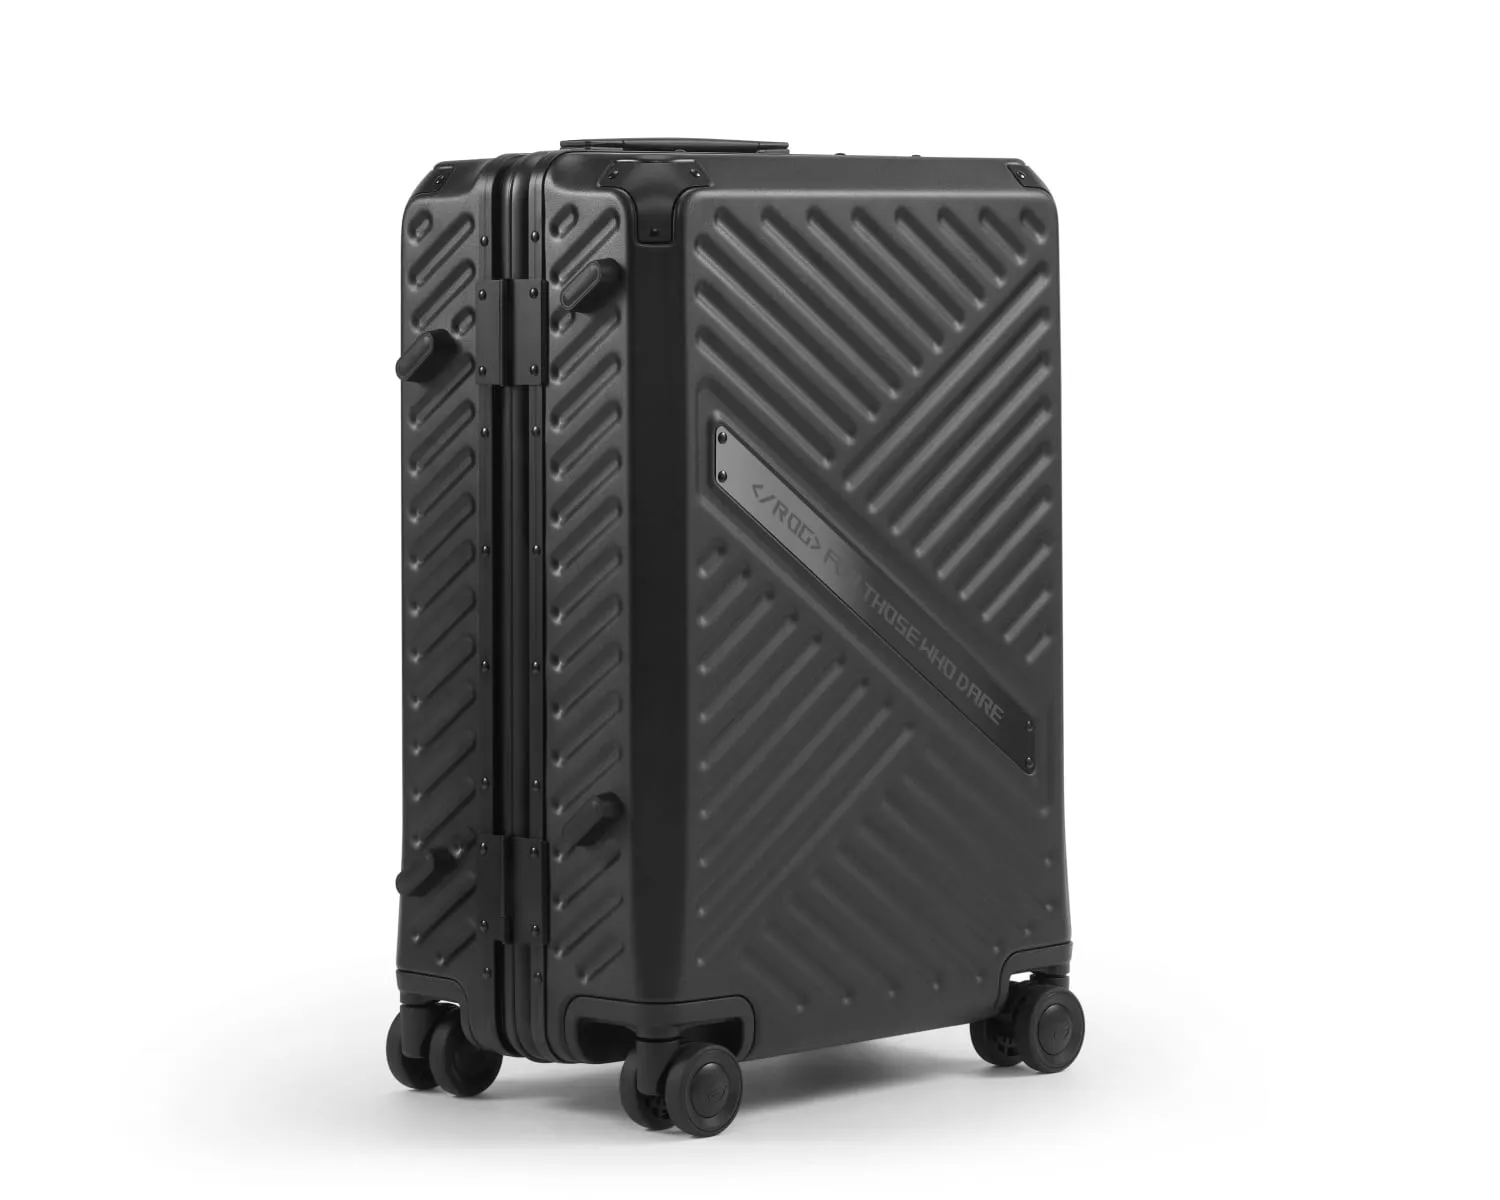 Off center front view of the ROG SLASH Hard Case Luggage on a white background